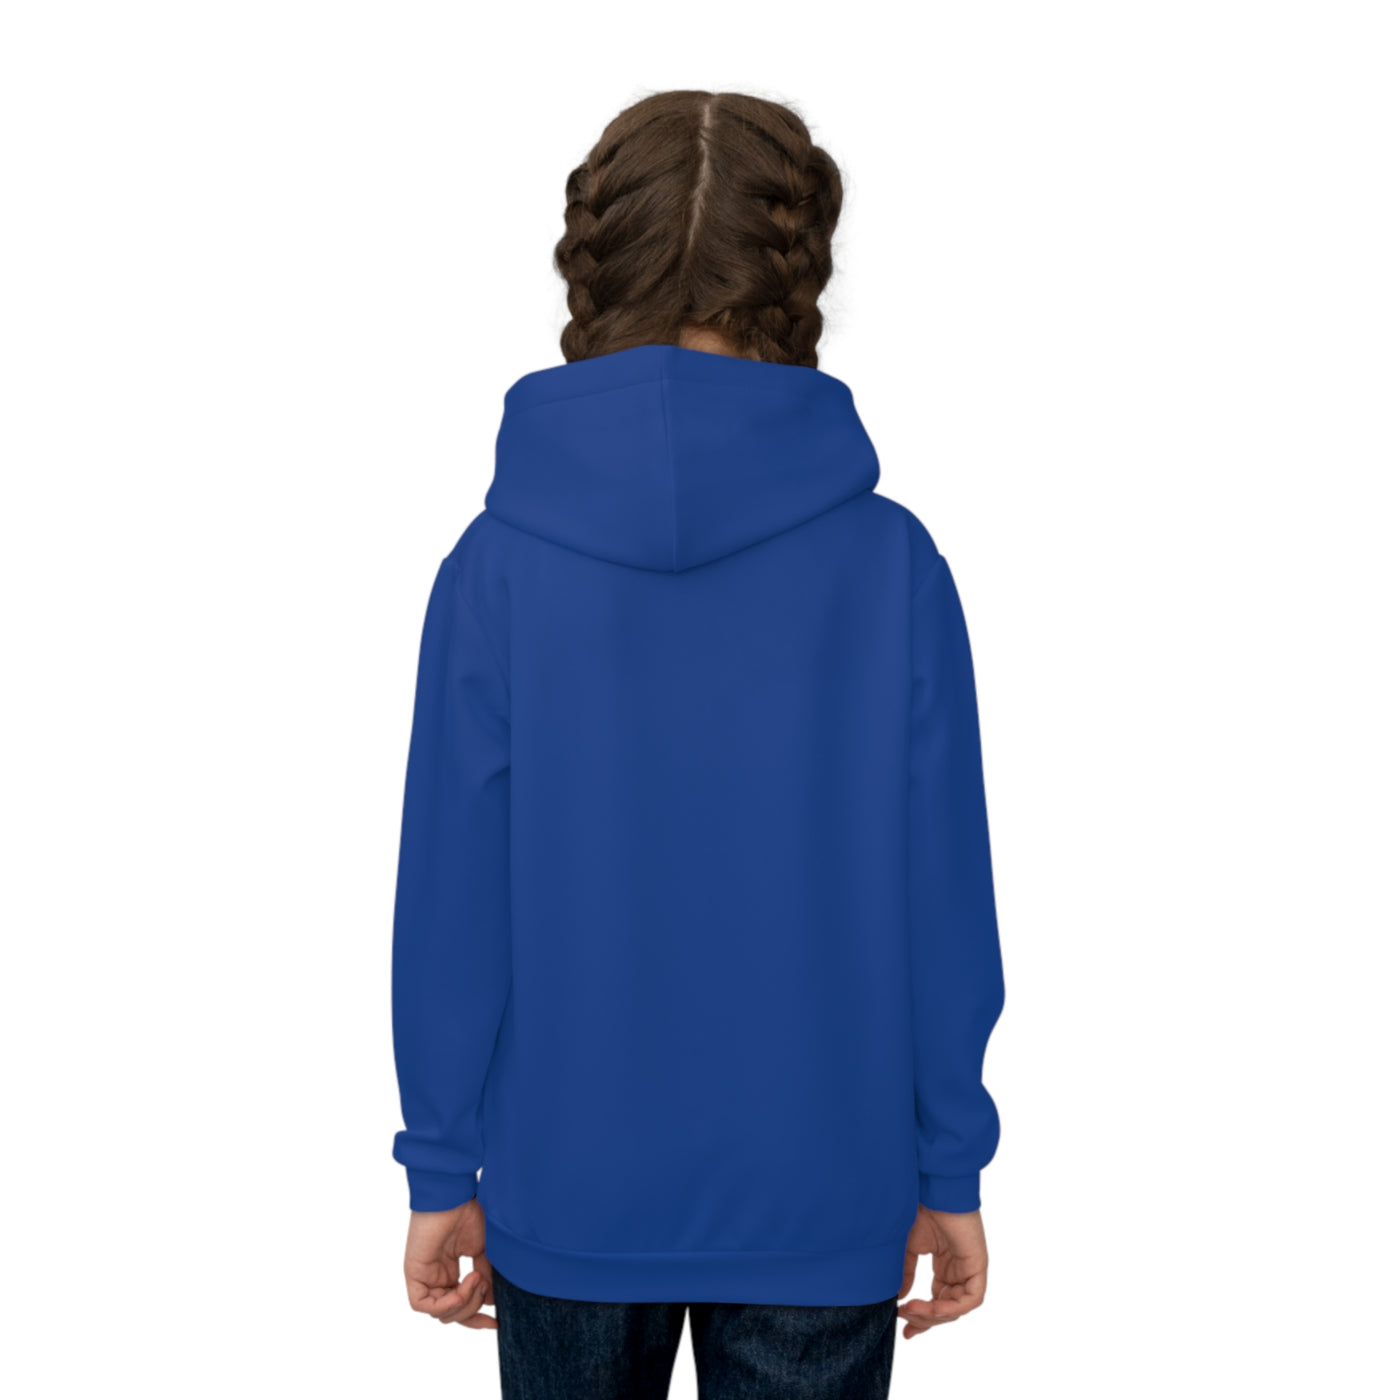 Royalty & Loyalty Kids Hoodie (Royal Blue) Sublimation